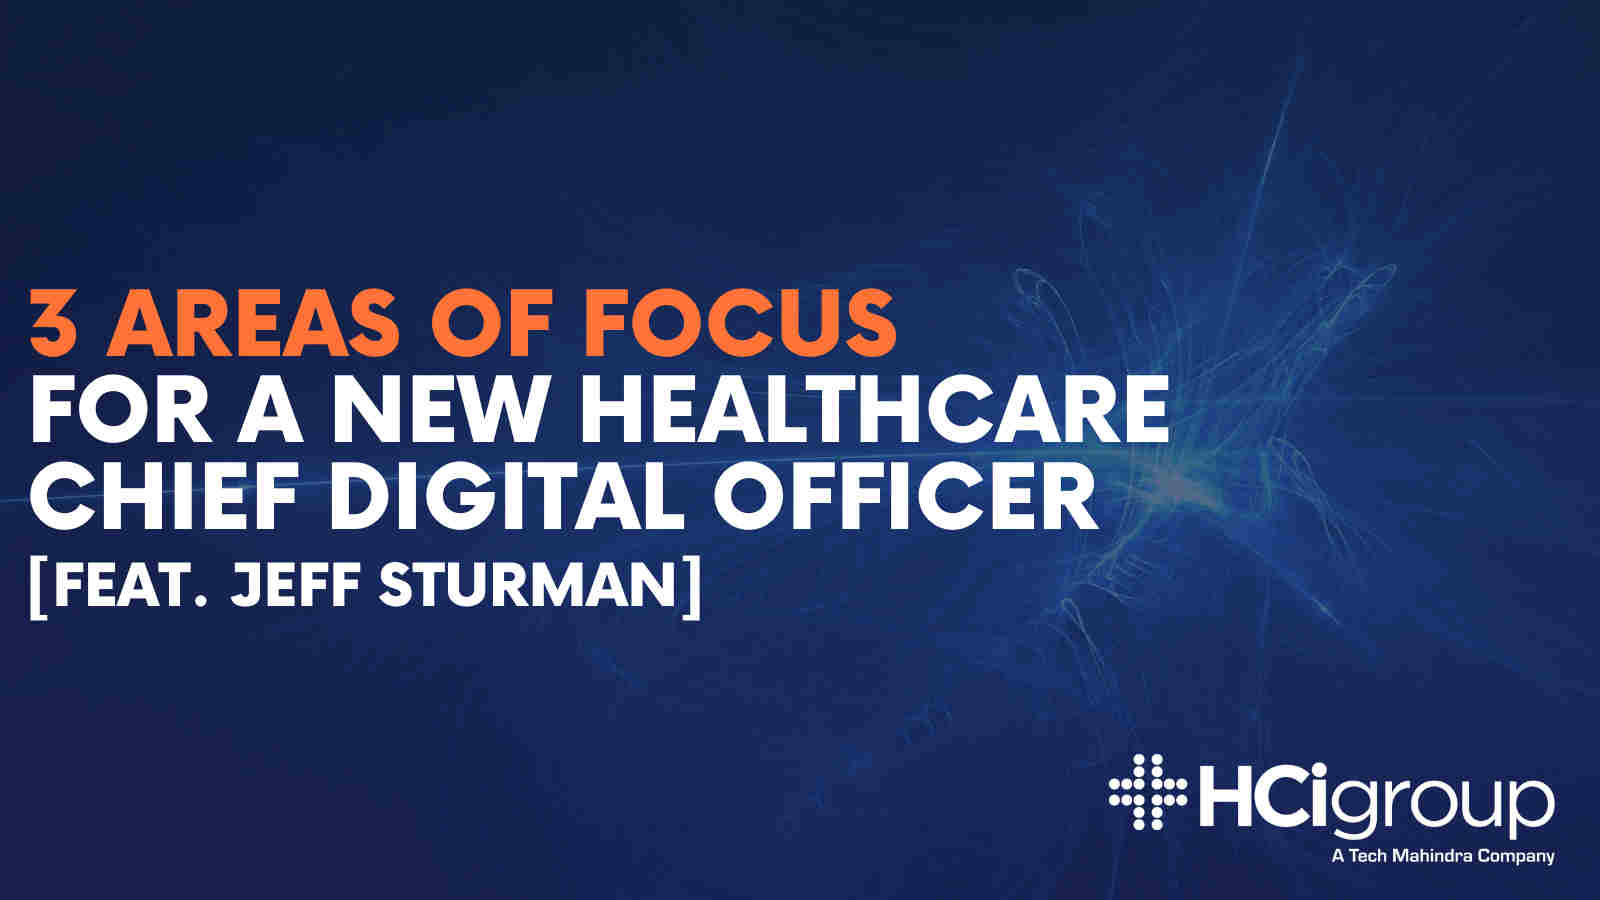 3 Areas of Focus for a New Healthcare Chief Digital Officer